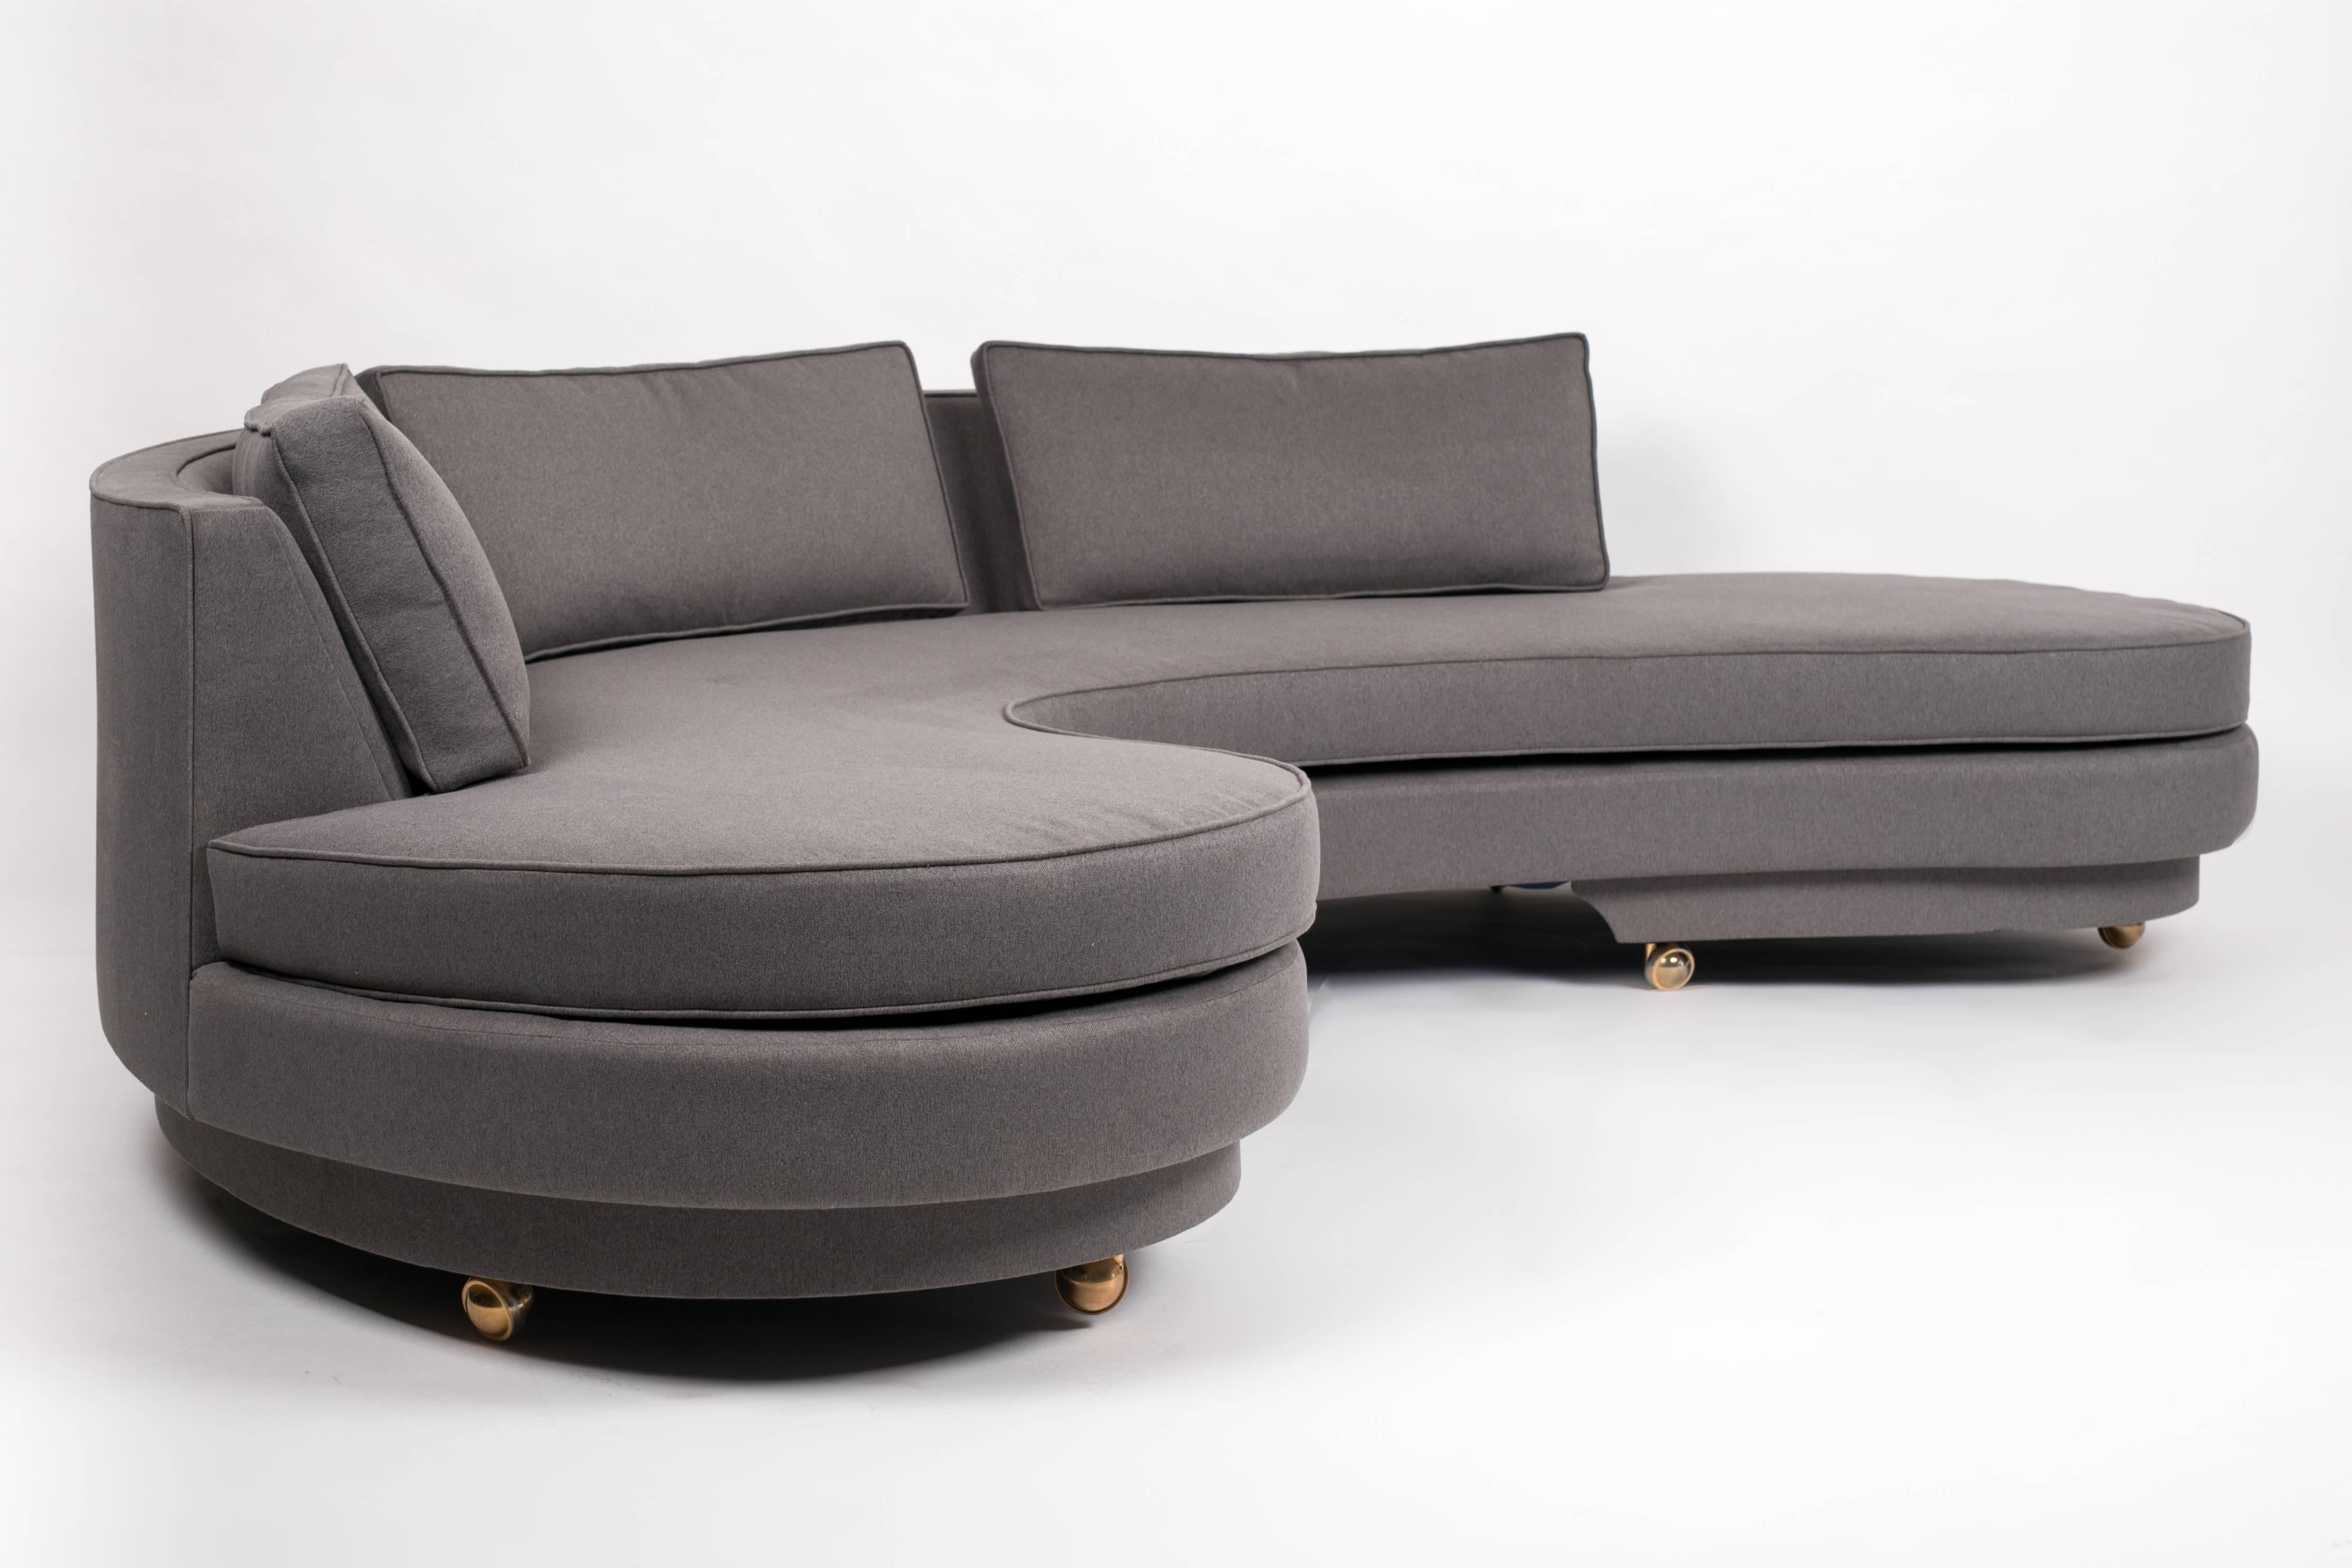 An American-made, semi-circular sofa in dark gray upholstery on brass casters. The sofa has an apostrophe-shaped back panel curved around a deep seat with rounded ends on an upholstered base. The seat and back cushions are removable and the cases